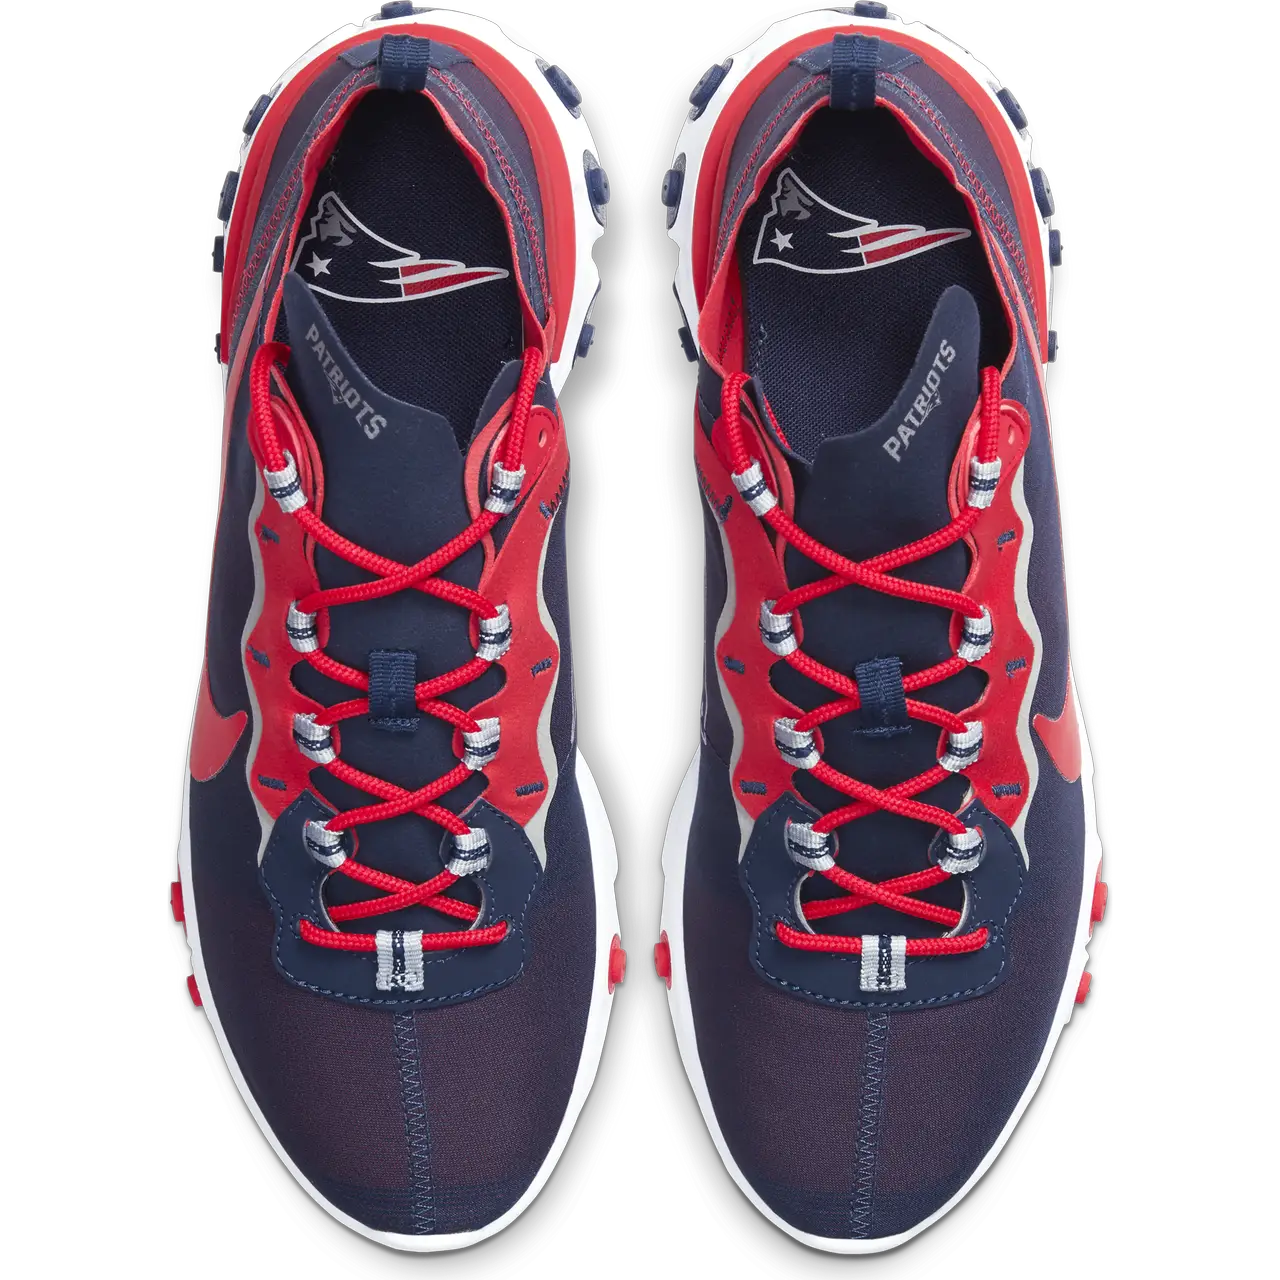 Nike releases another new Patriots shoe: Nike React Element NFL team ...